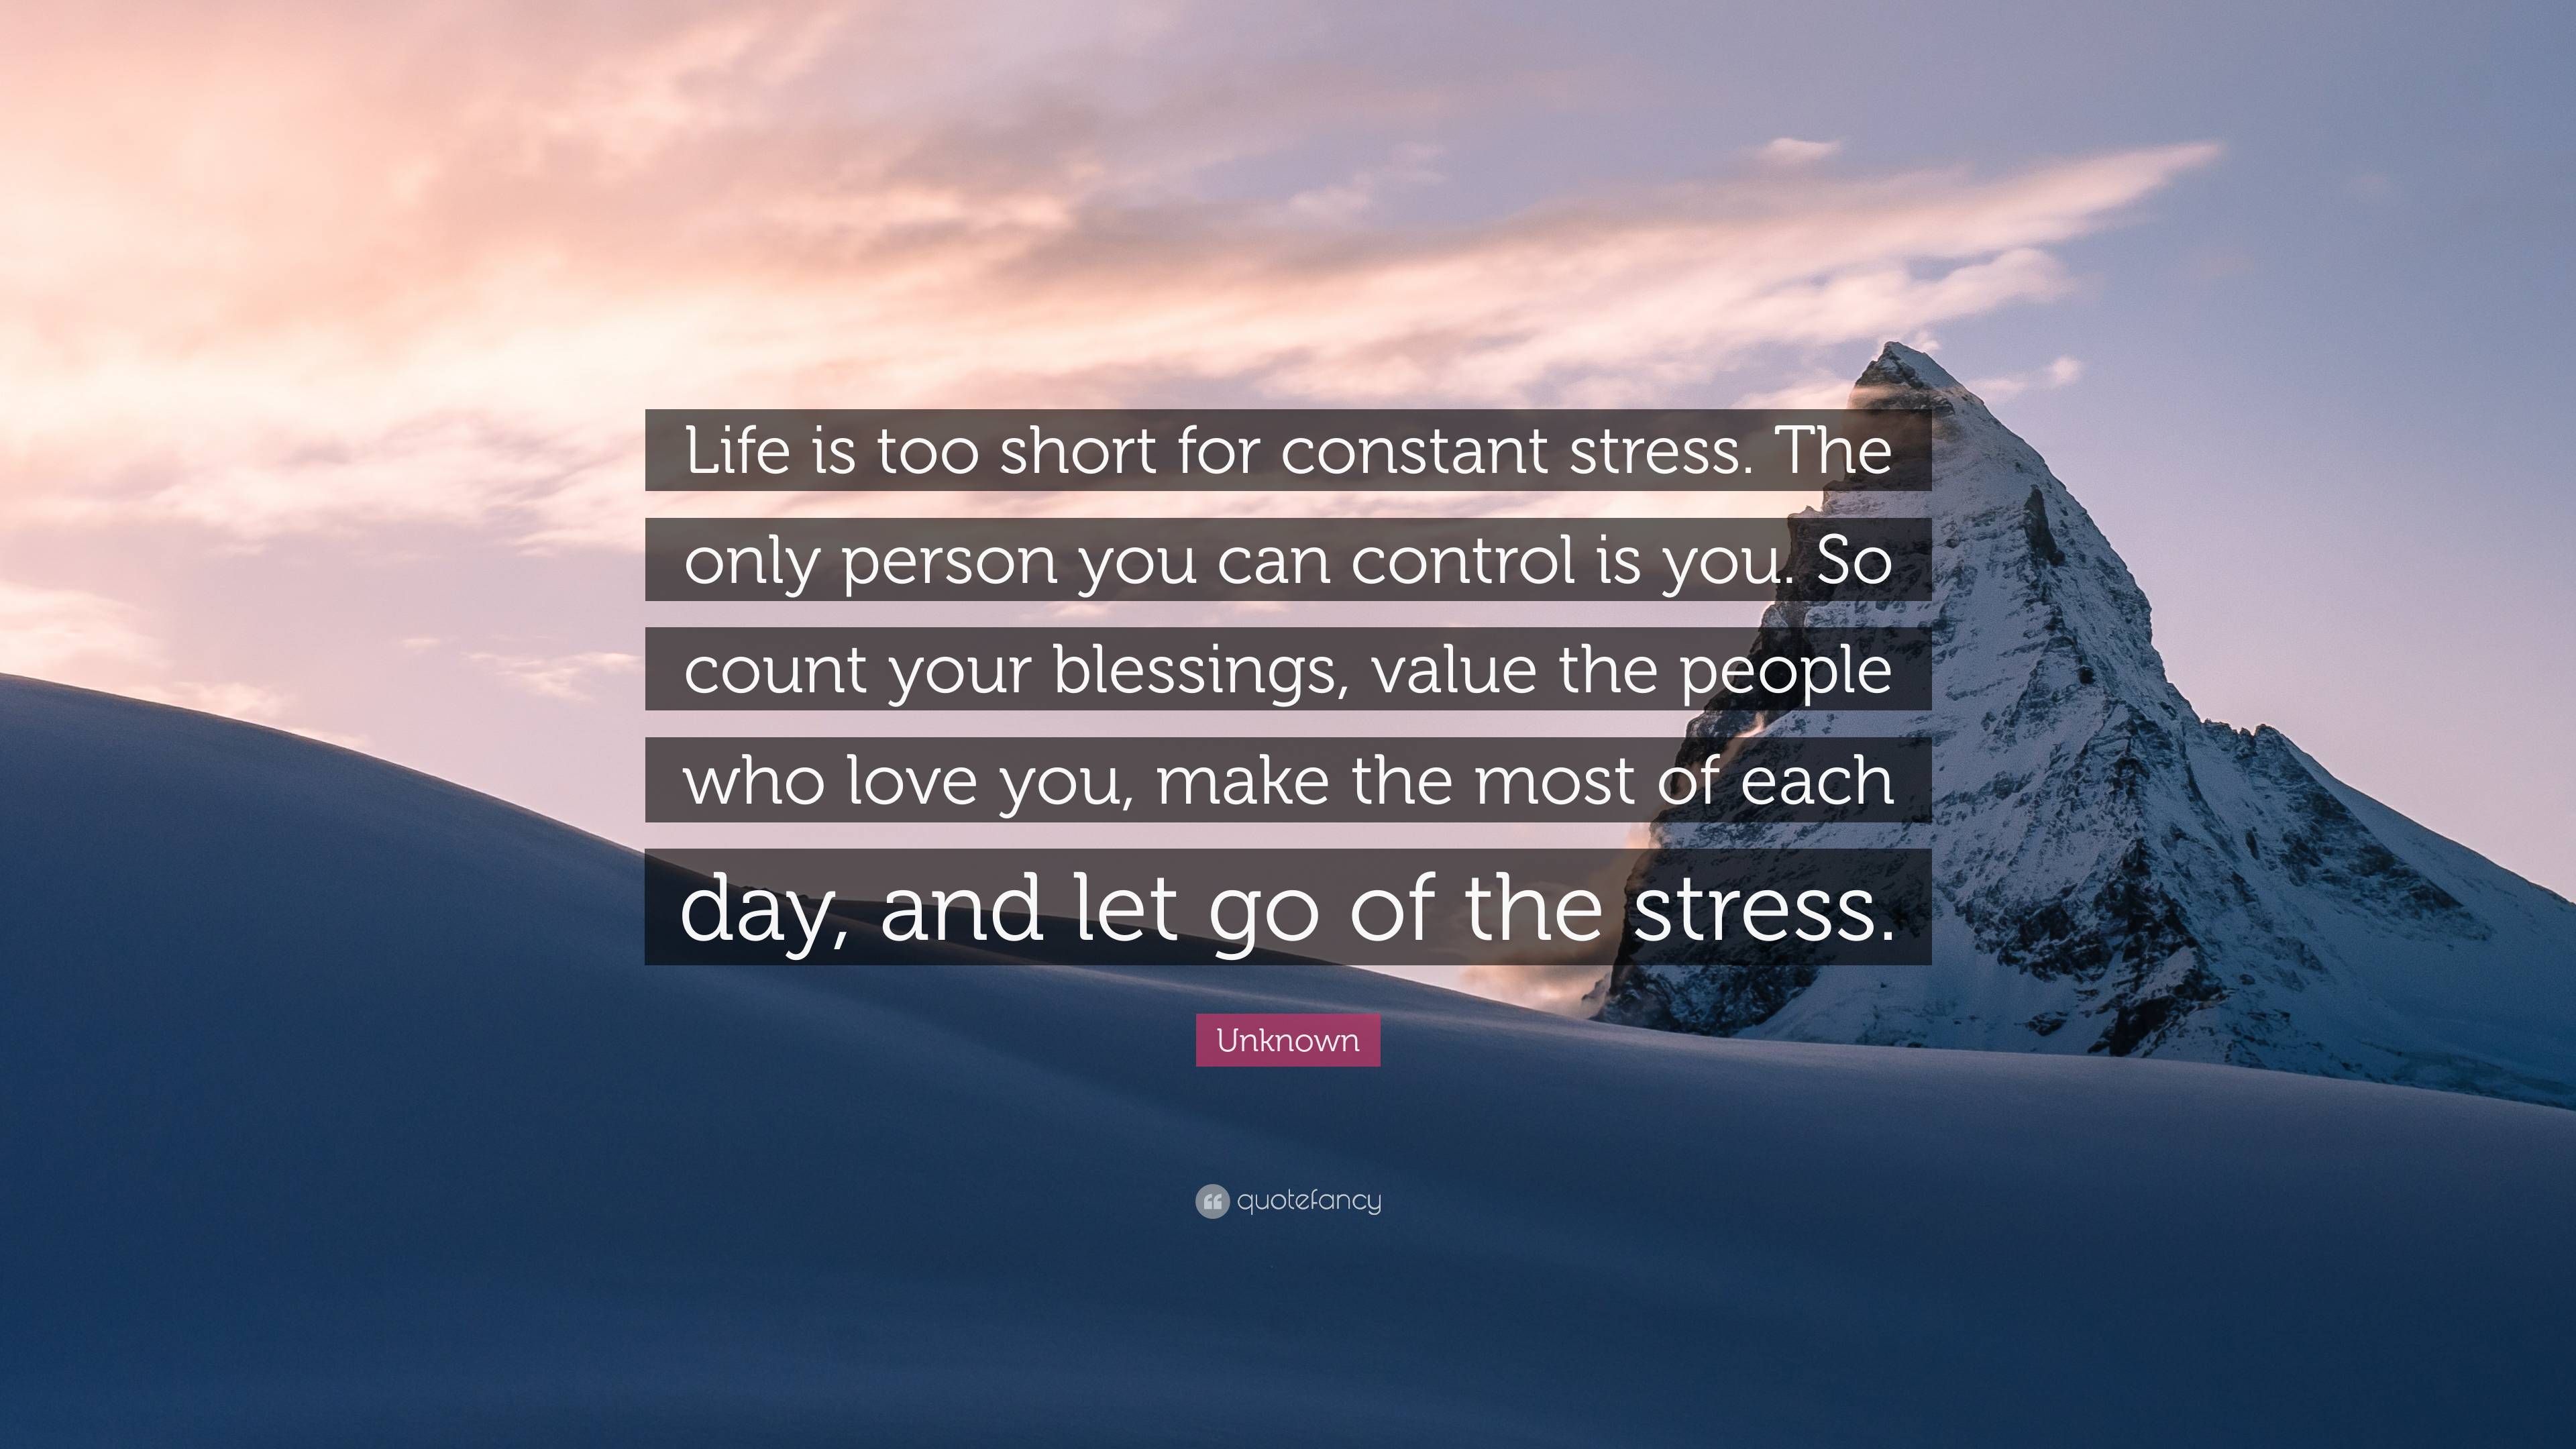 Unknown Quote: “Life is too short for constant stress. The only